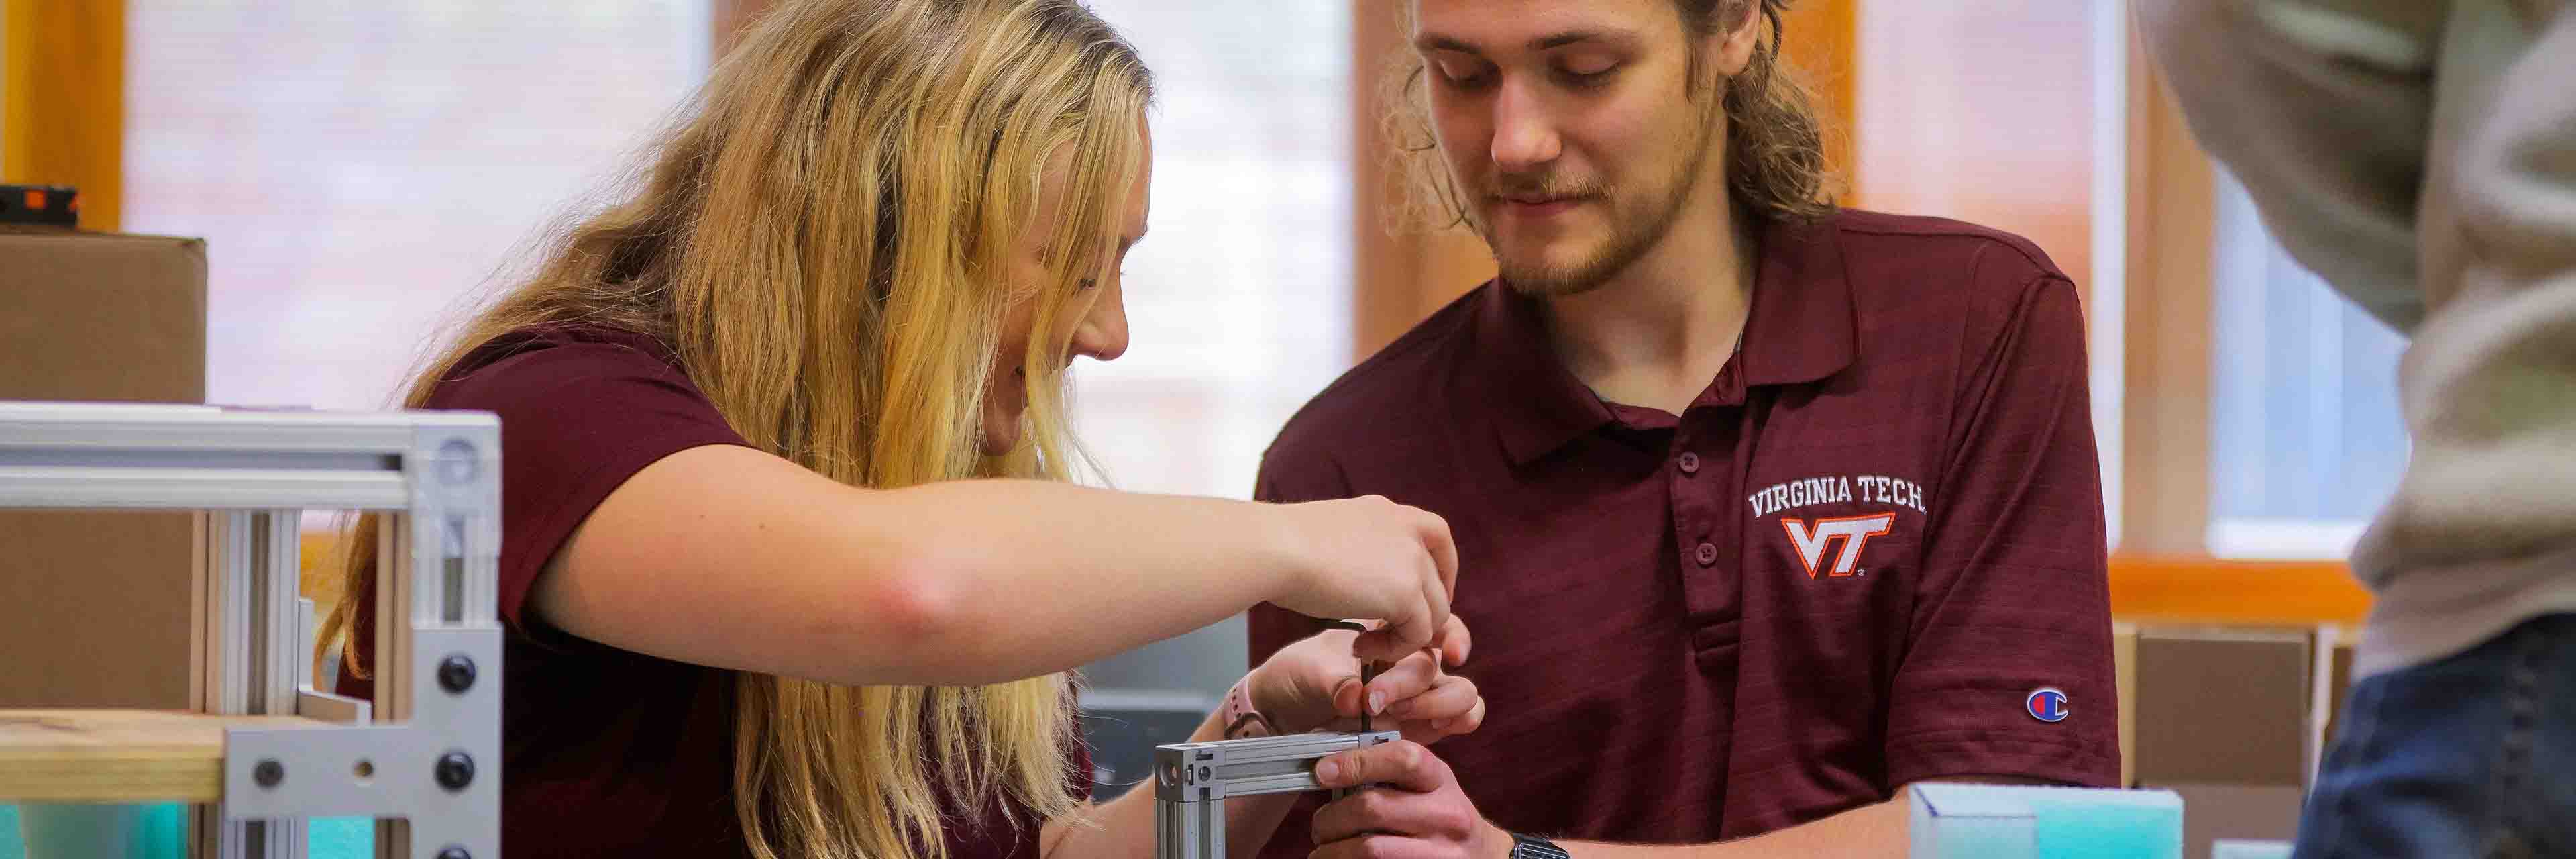 A student holds a metal frame while another turns a screw.